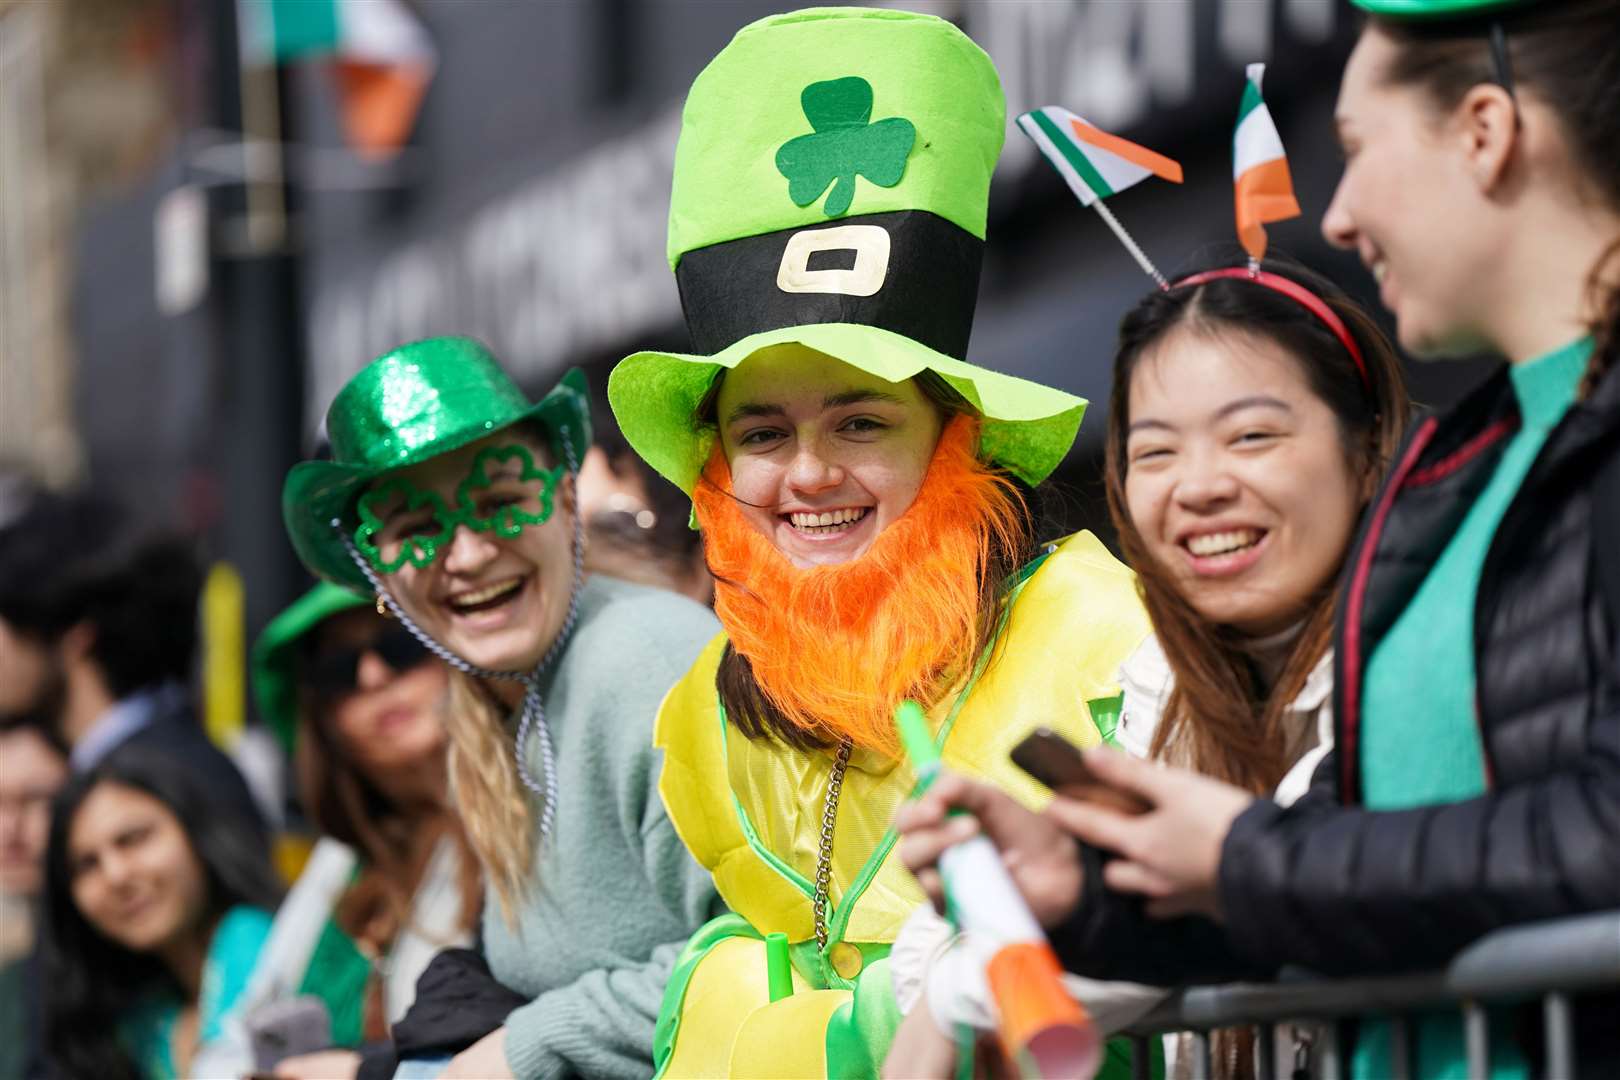 Crowds at the St Patrick’s Day parade in Birmingham (Jacob King/PA)